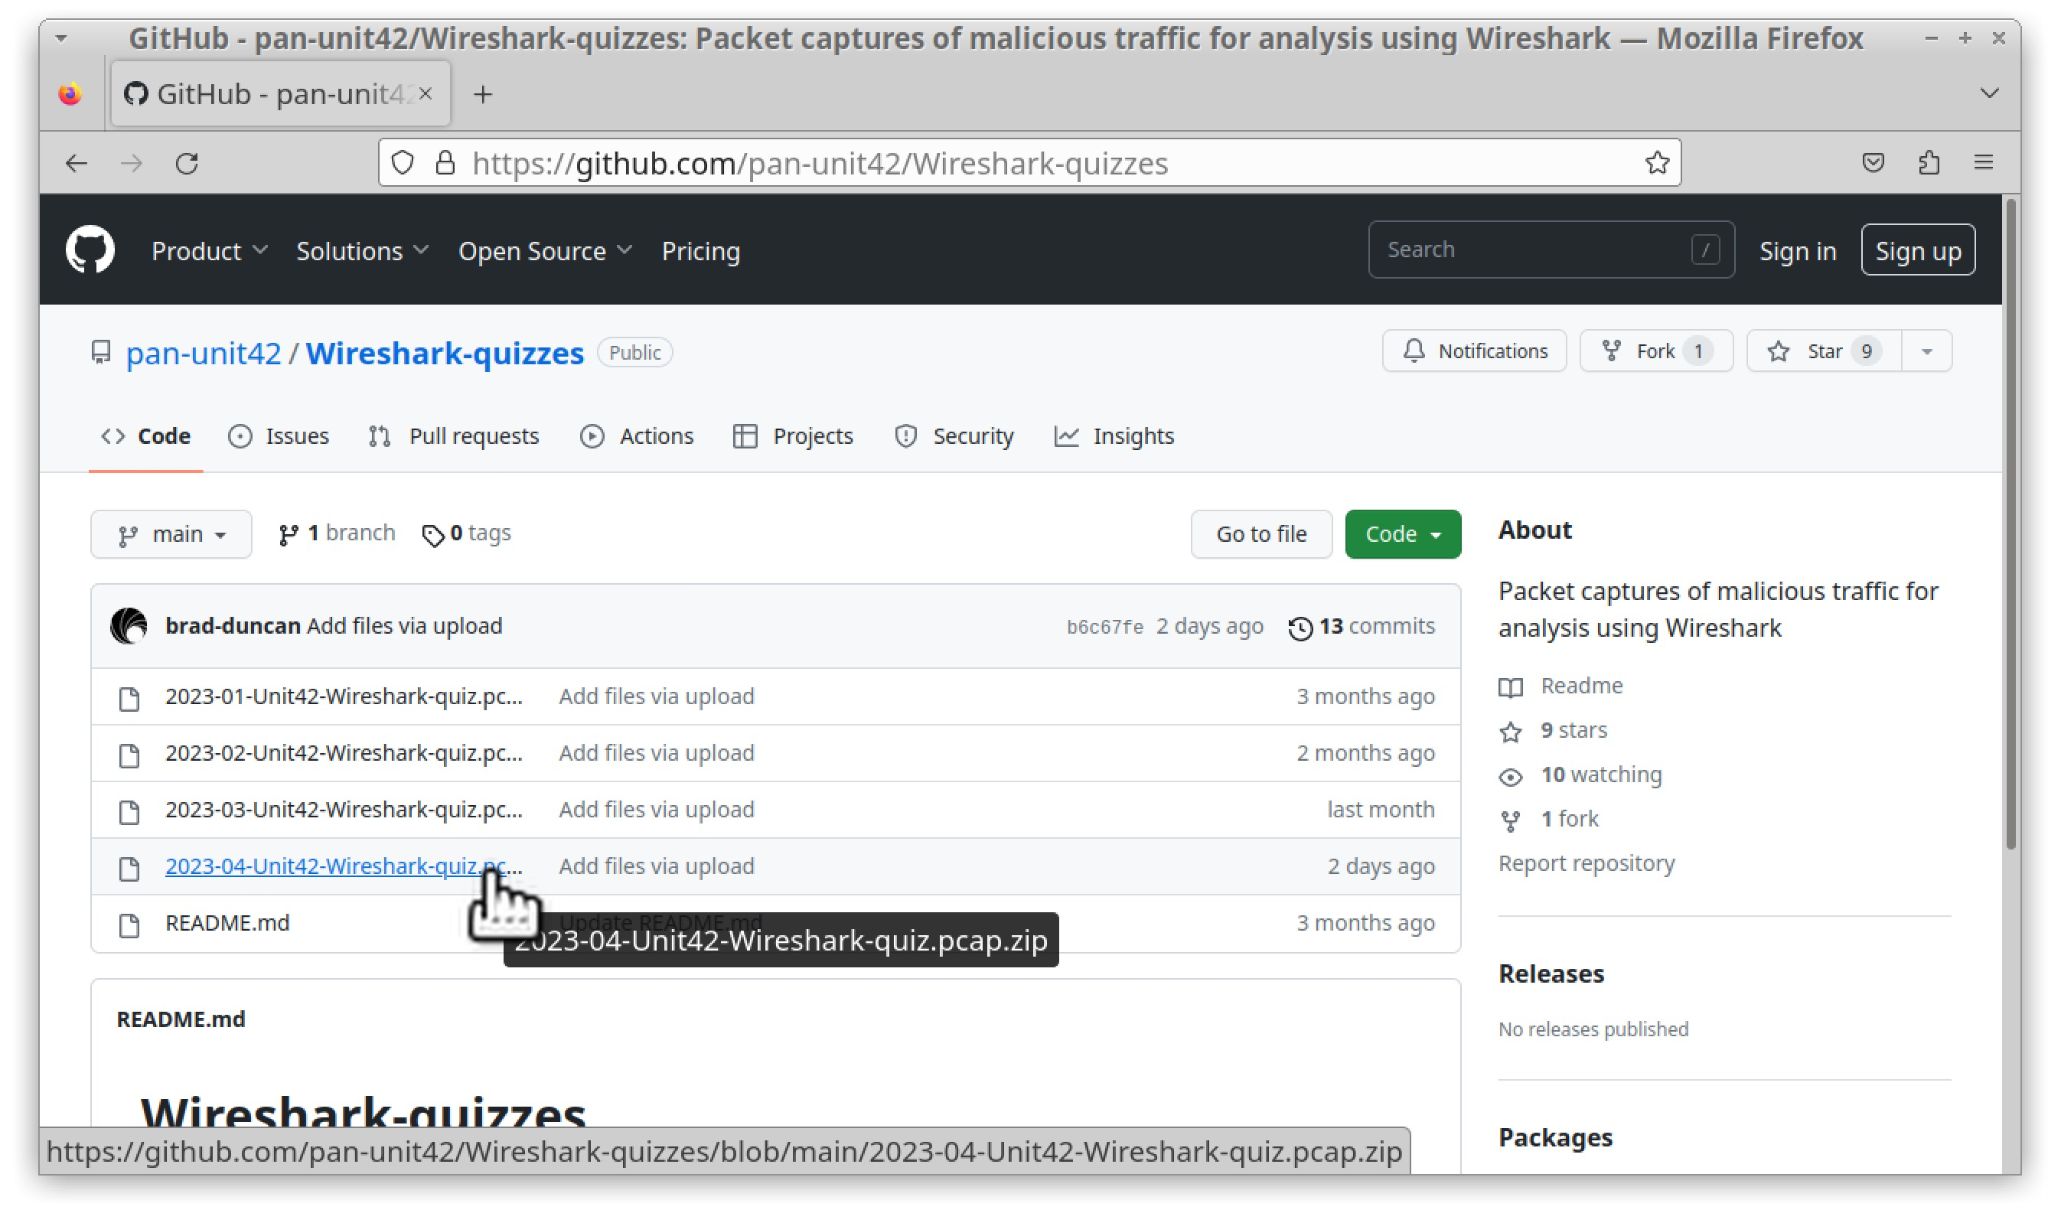 Image 1 is a screenshot of Wireshark software showing where to click to download the ZIP archive from GitHub. 